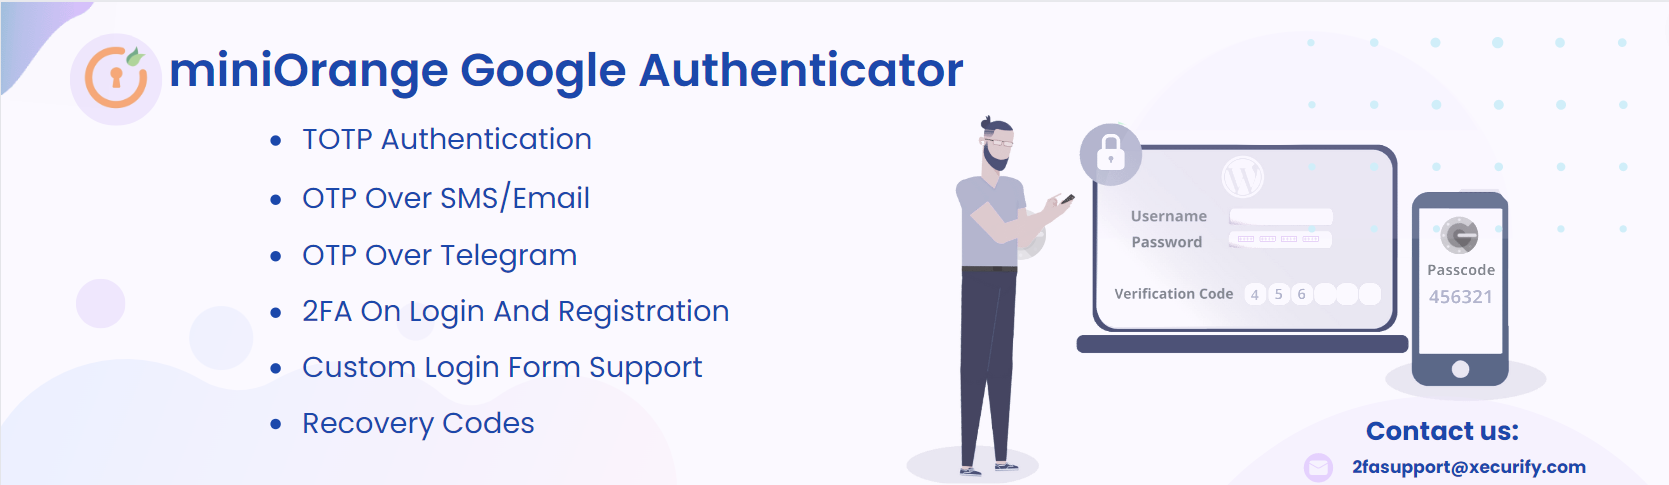 Product image for miniOrange's Google Authenticator – WordPress Two Factor Authentication (2FA , Two Factor, OTP SMS and Email) | Passwordless login.